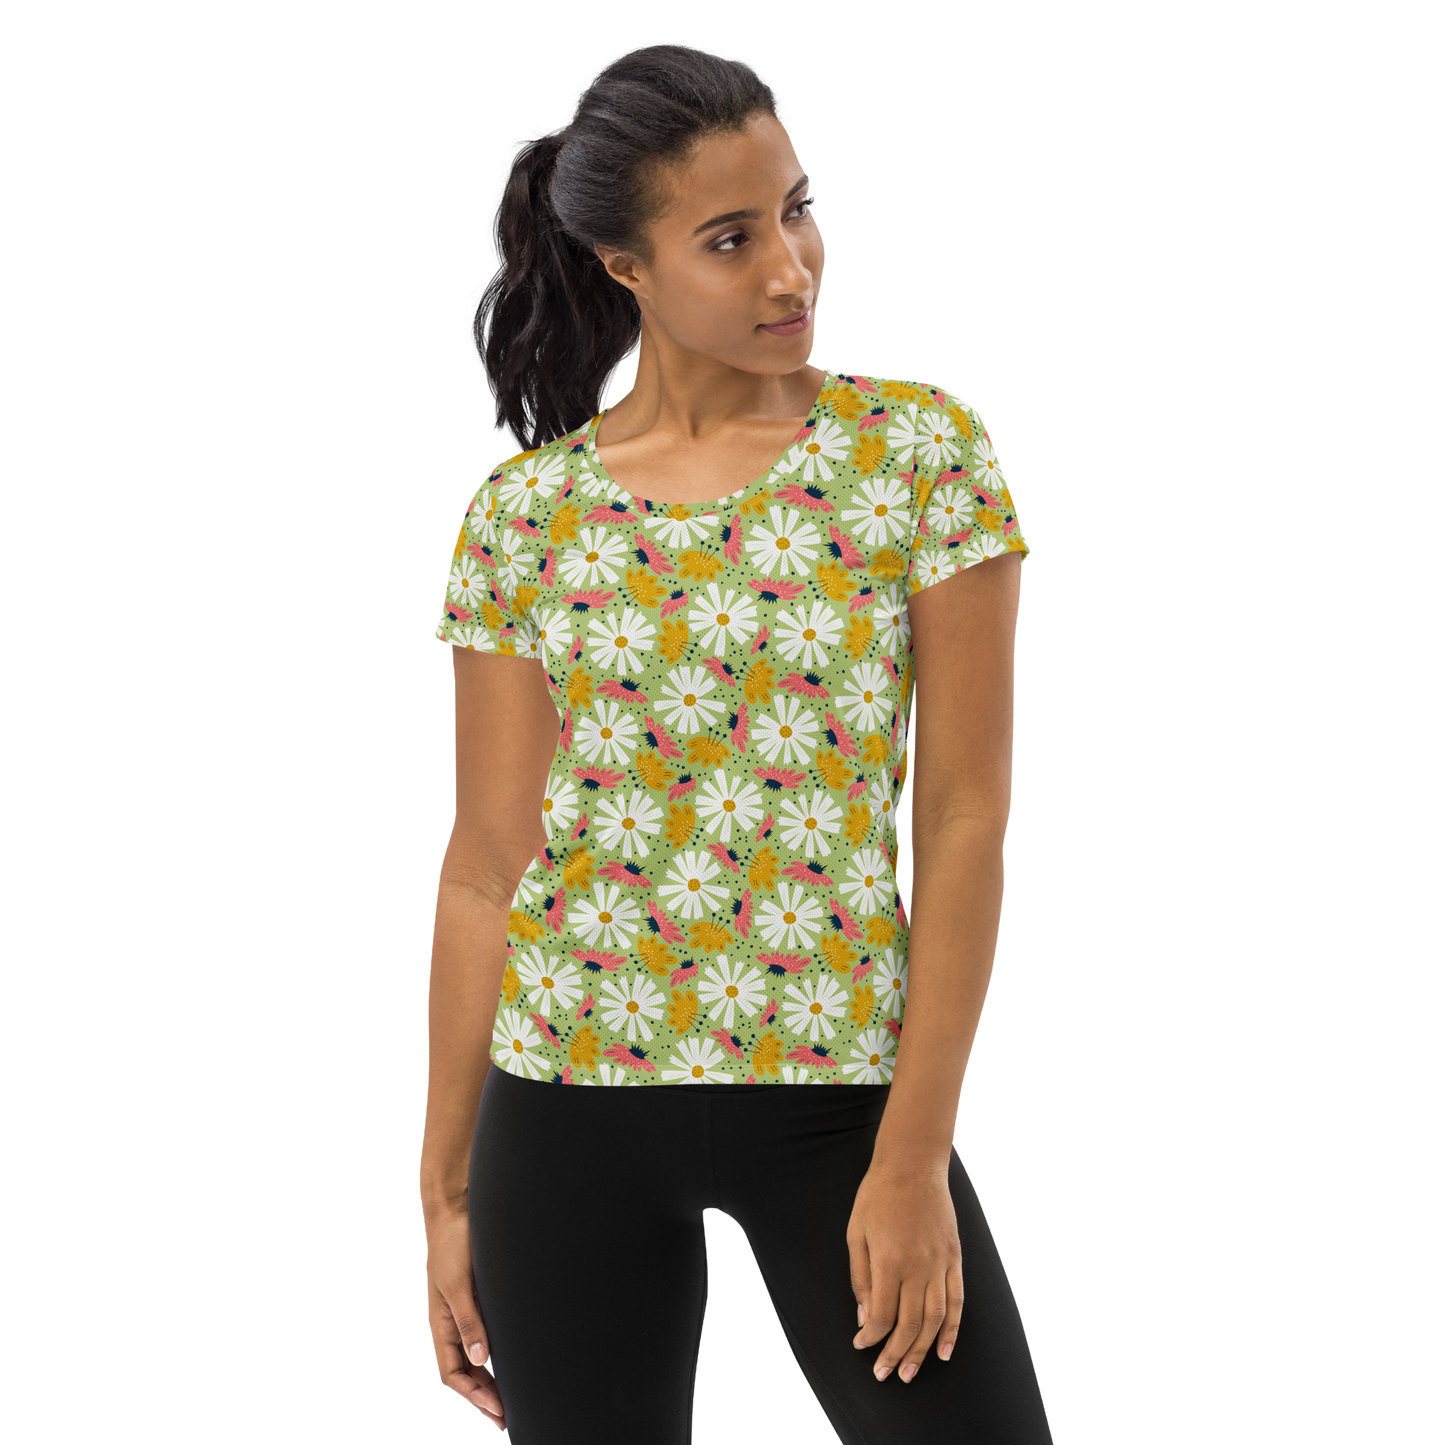 Scandinavian Spring Floral | Seamless Patterns | All-Over Print Women's Athletic T-Shirt - #4